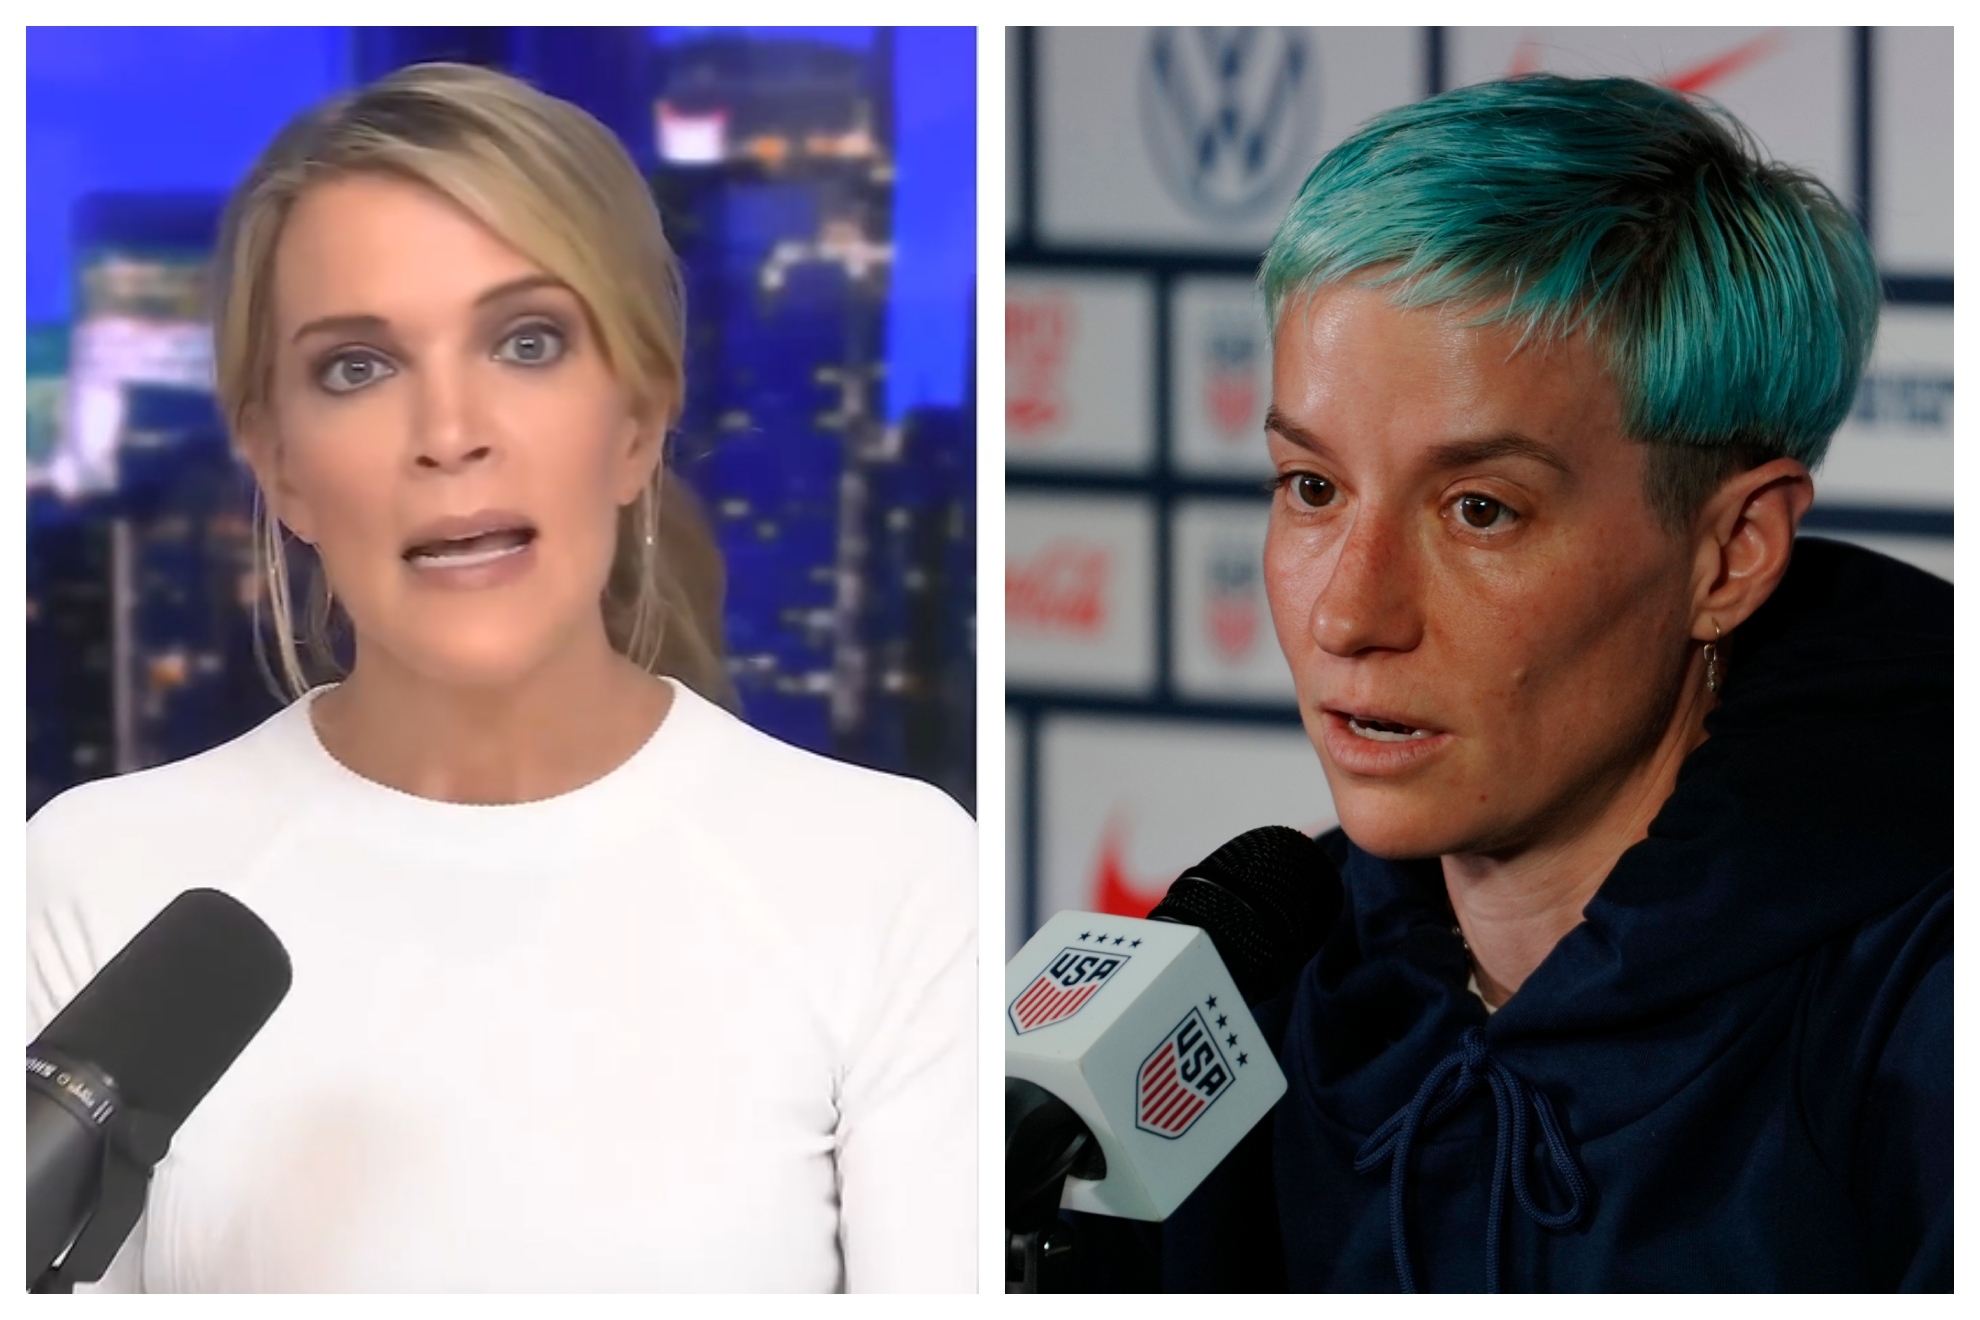 Megyn Kelly accuses Rapinoe of 'poisoning team against the country' amid national anthem controversy